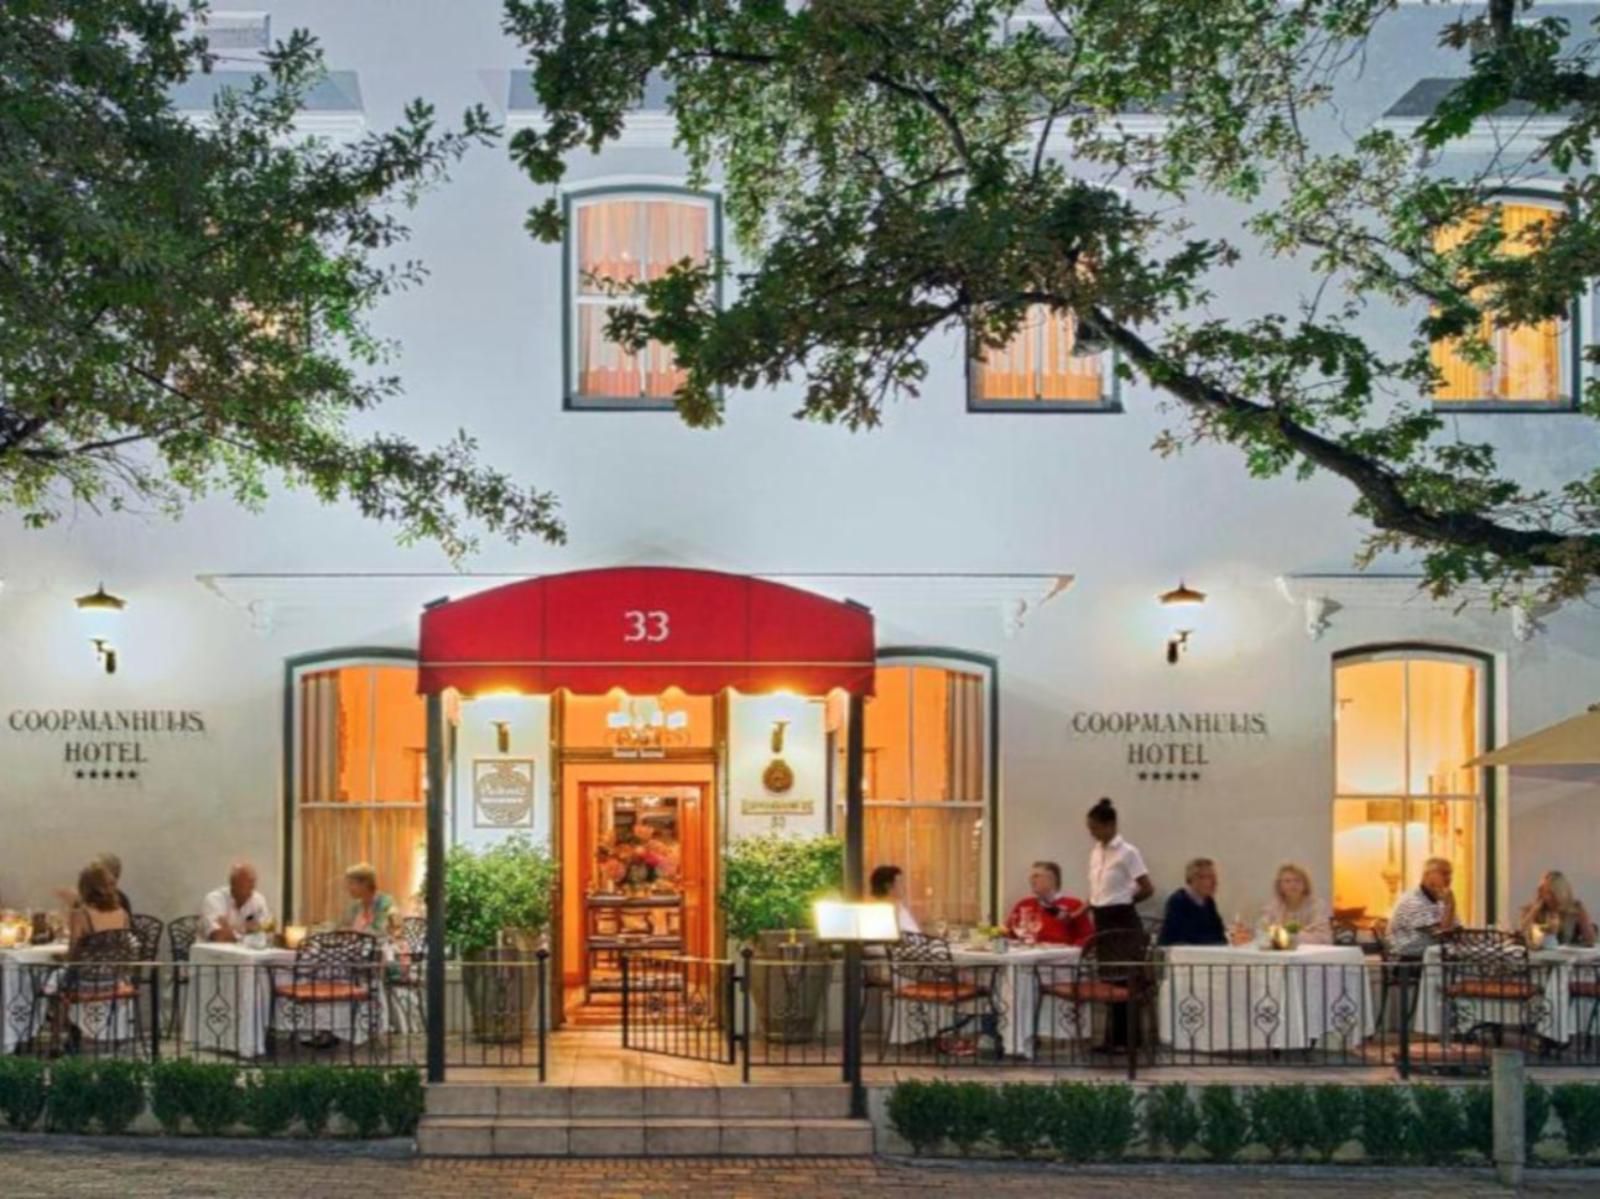 Coopmanhuijs Boutique Hotel And Spa Stellenbosch Western Cape South Africa House, Building, Architecture, Bar